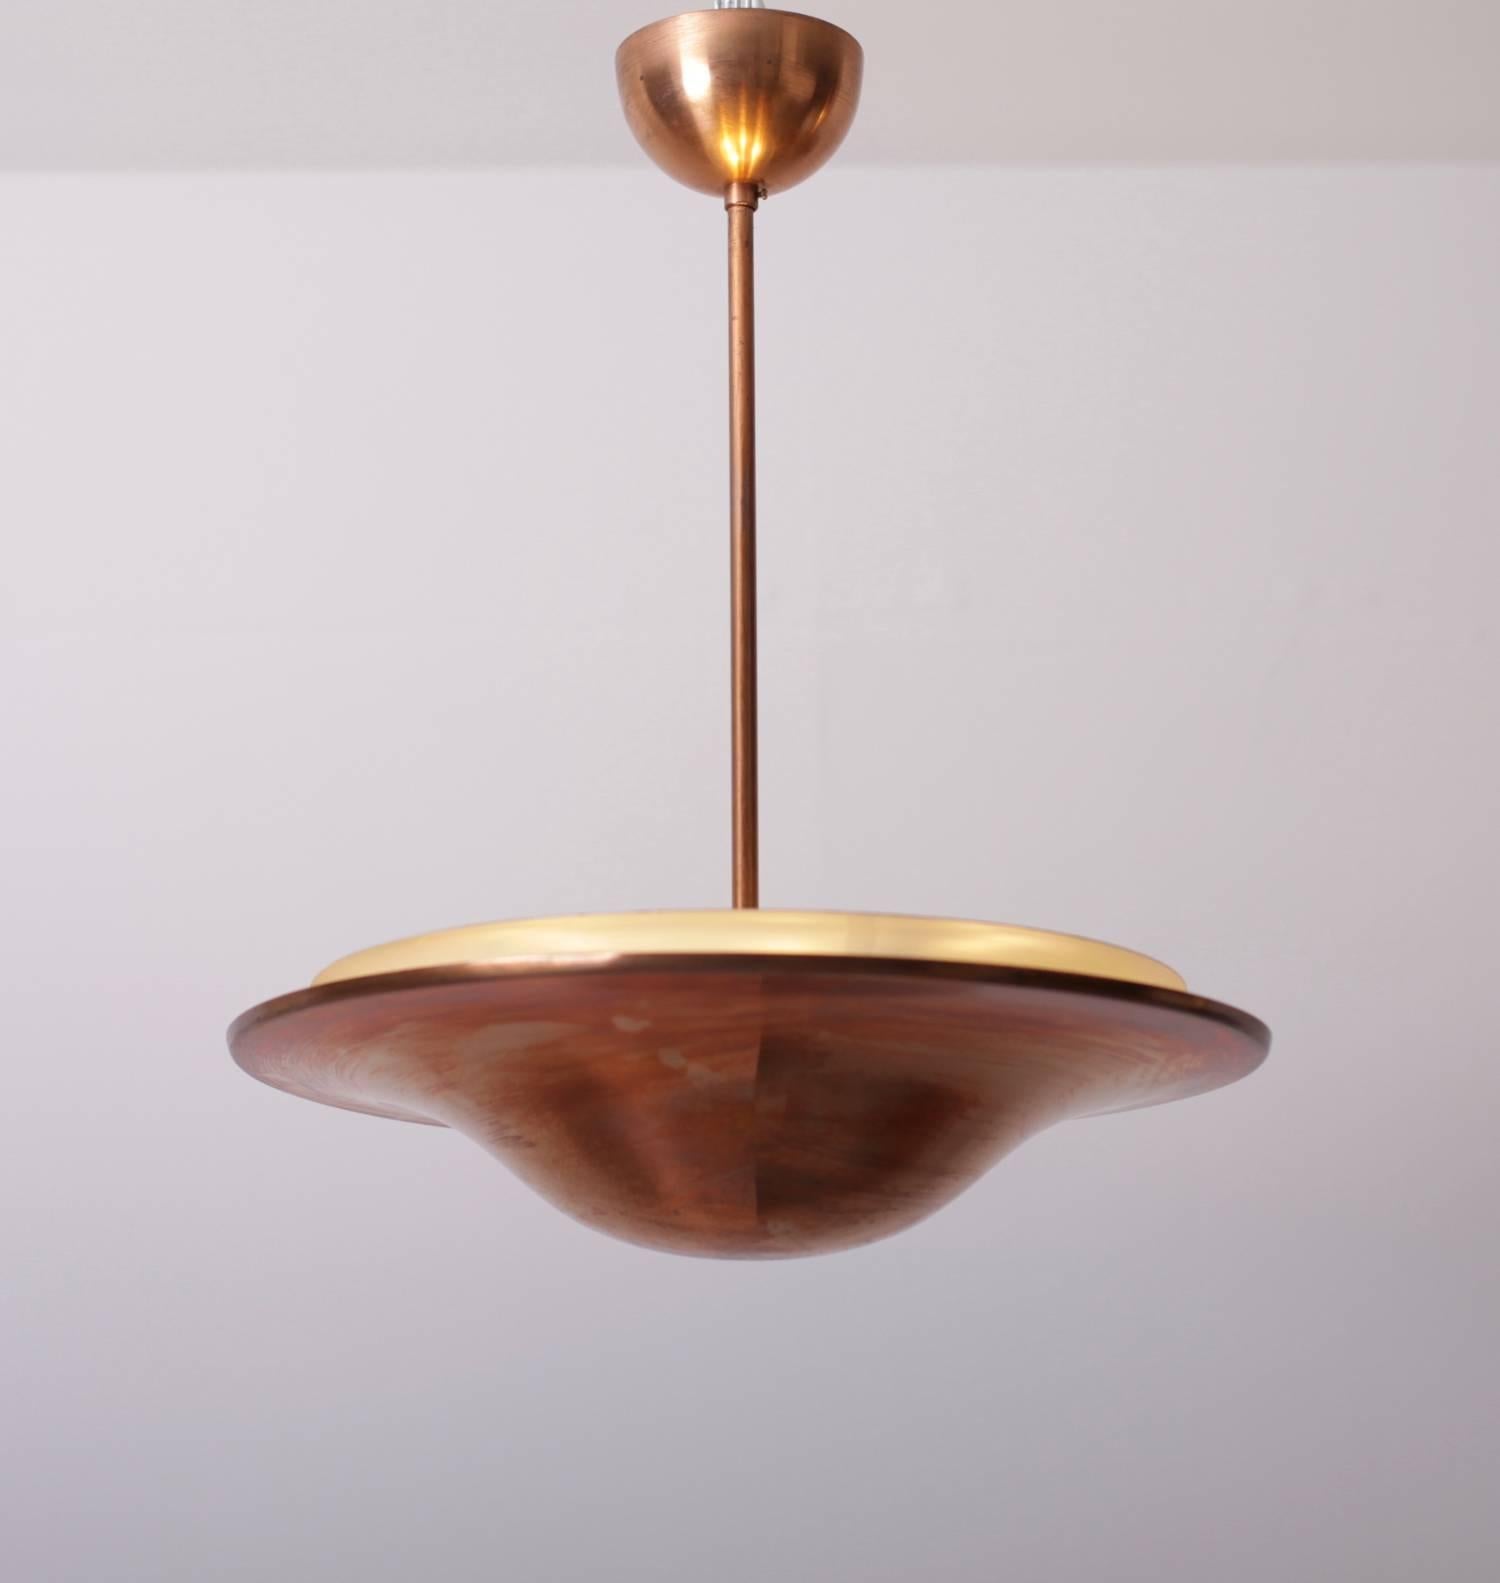 A unique copper pendant lamp from the 1930s in excellent vintage condition.
4 x E27
To be on the safe side, the lamp should be checked locally by a specialist concerning local requirements.

